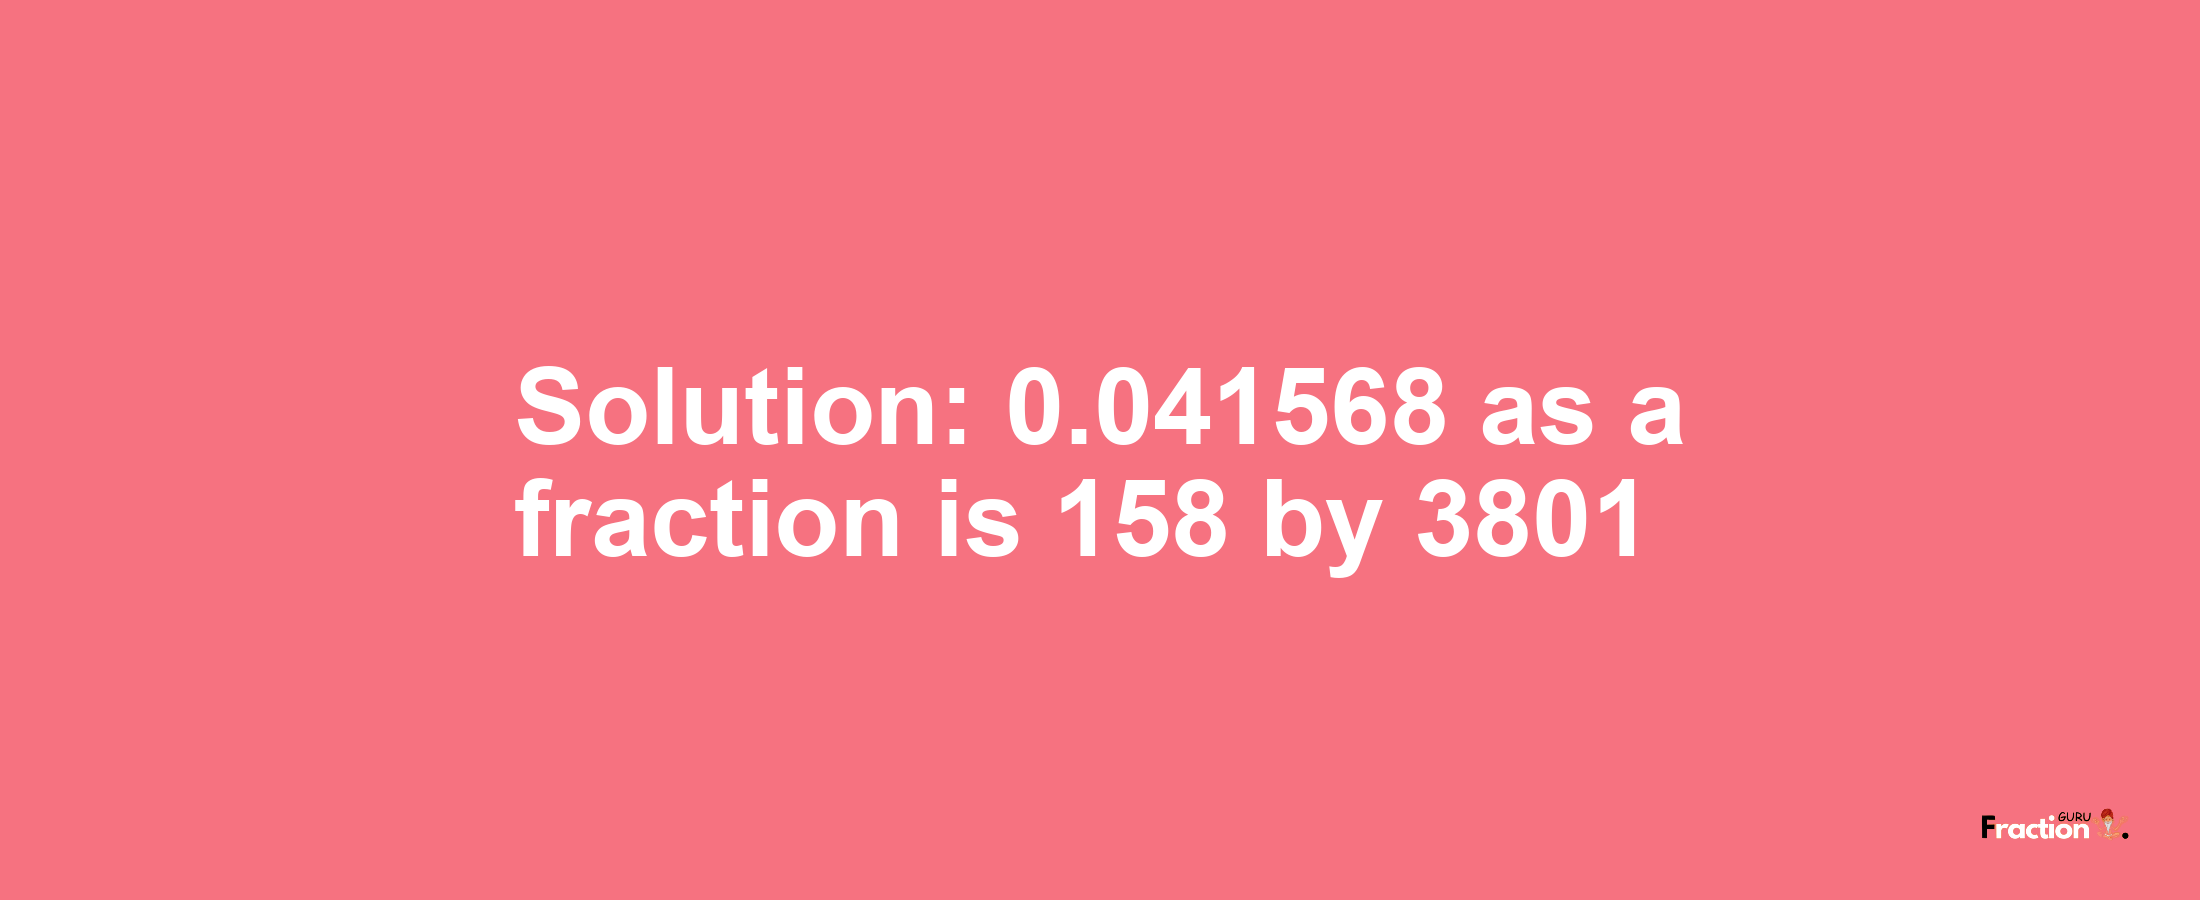 Solution:0.041568 as a fraction is 158/3801